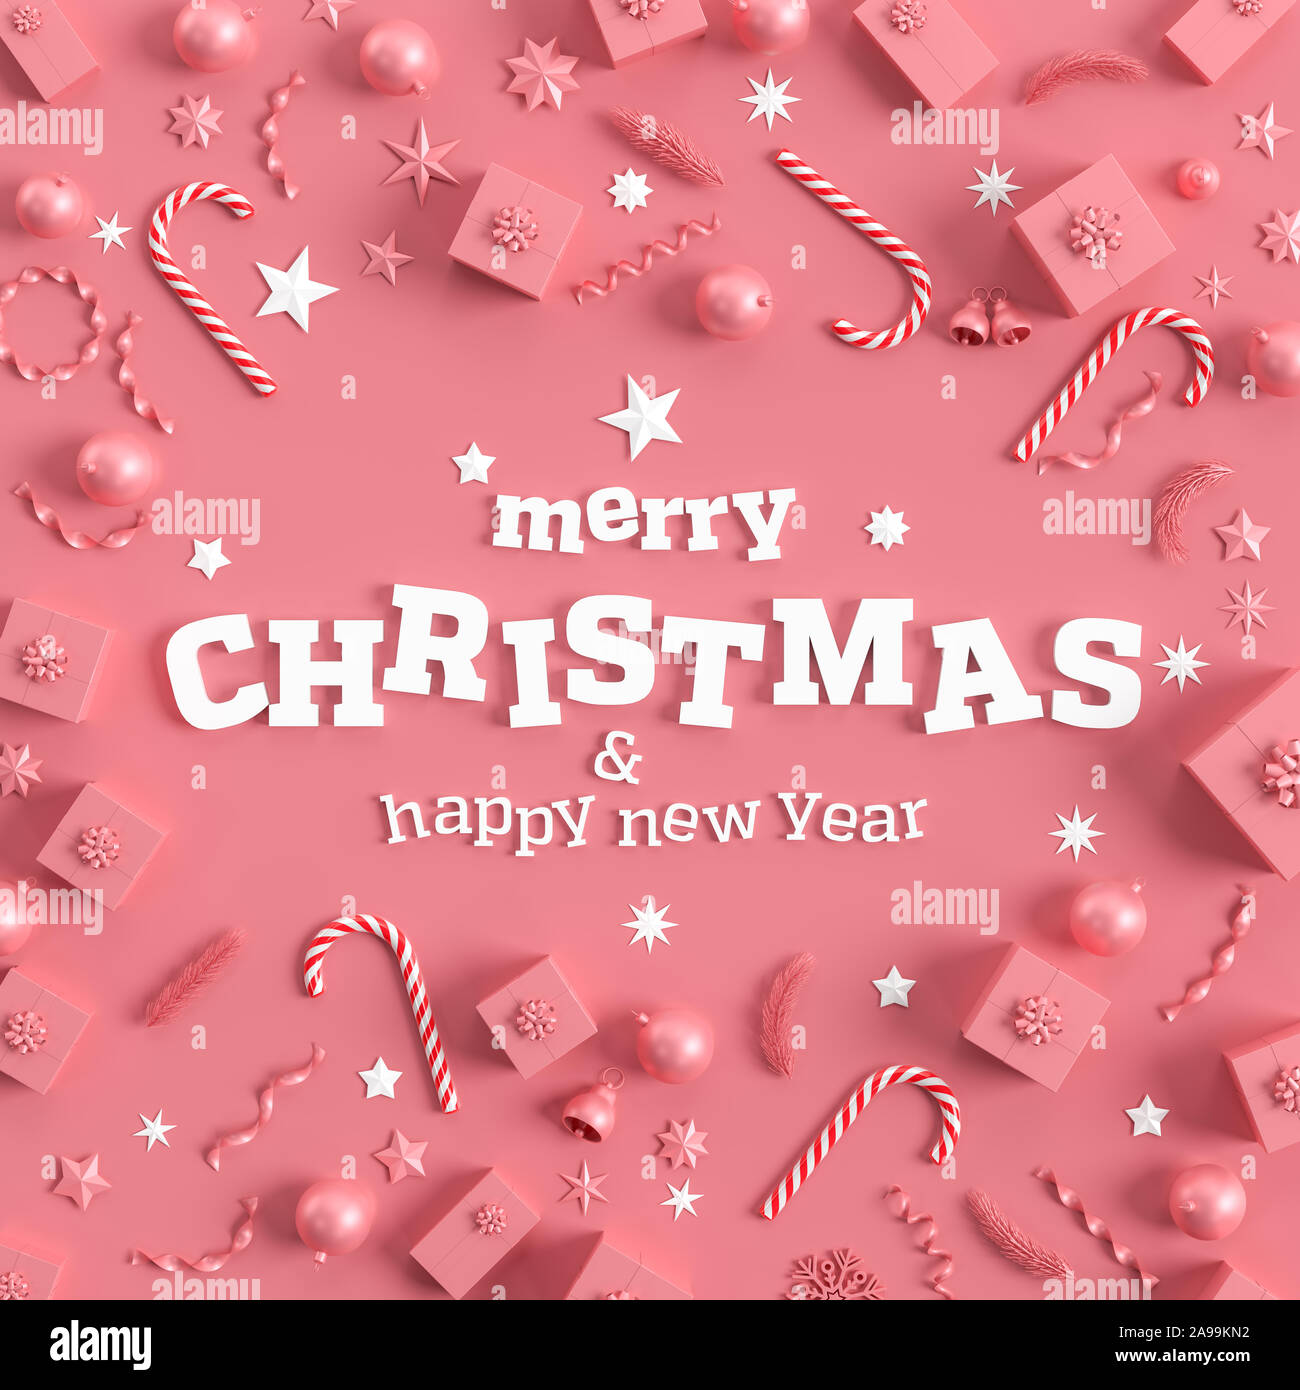 Merry Christmas and happy new year background. Christmas background design  with ornaments on coral pink background. 3D illustration Stock Photo - Alamy